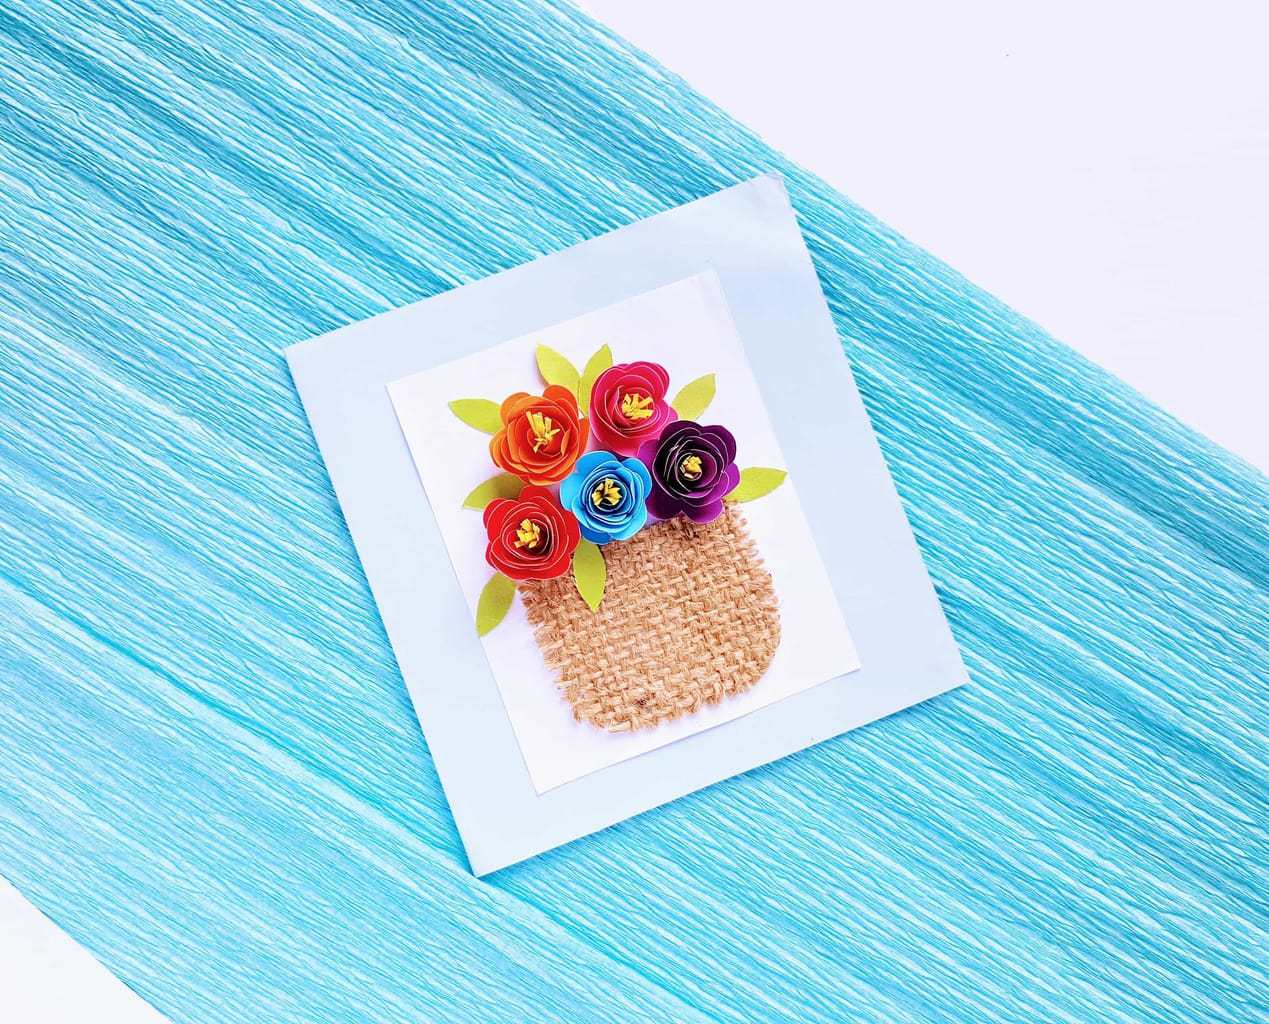 Mothers Day Gift Ideas, diy Mother's Day card, diy rolled flowers, rolled flowers on card, 3d card with flowers, Mother's Day greeting card, homemade greeting card for Mother's Day